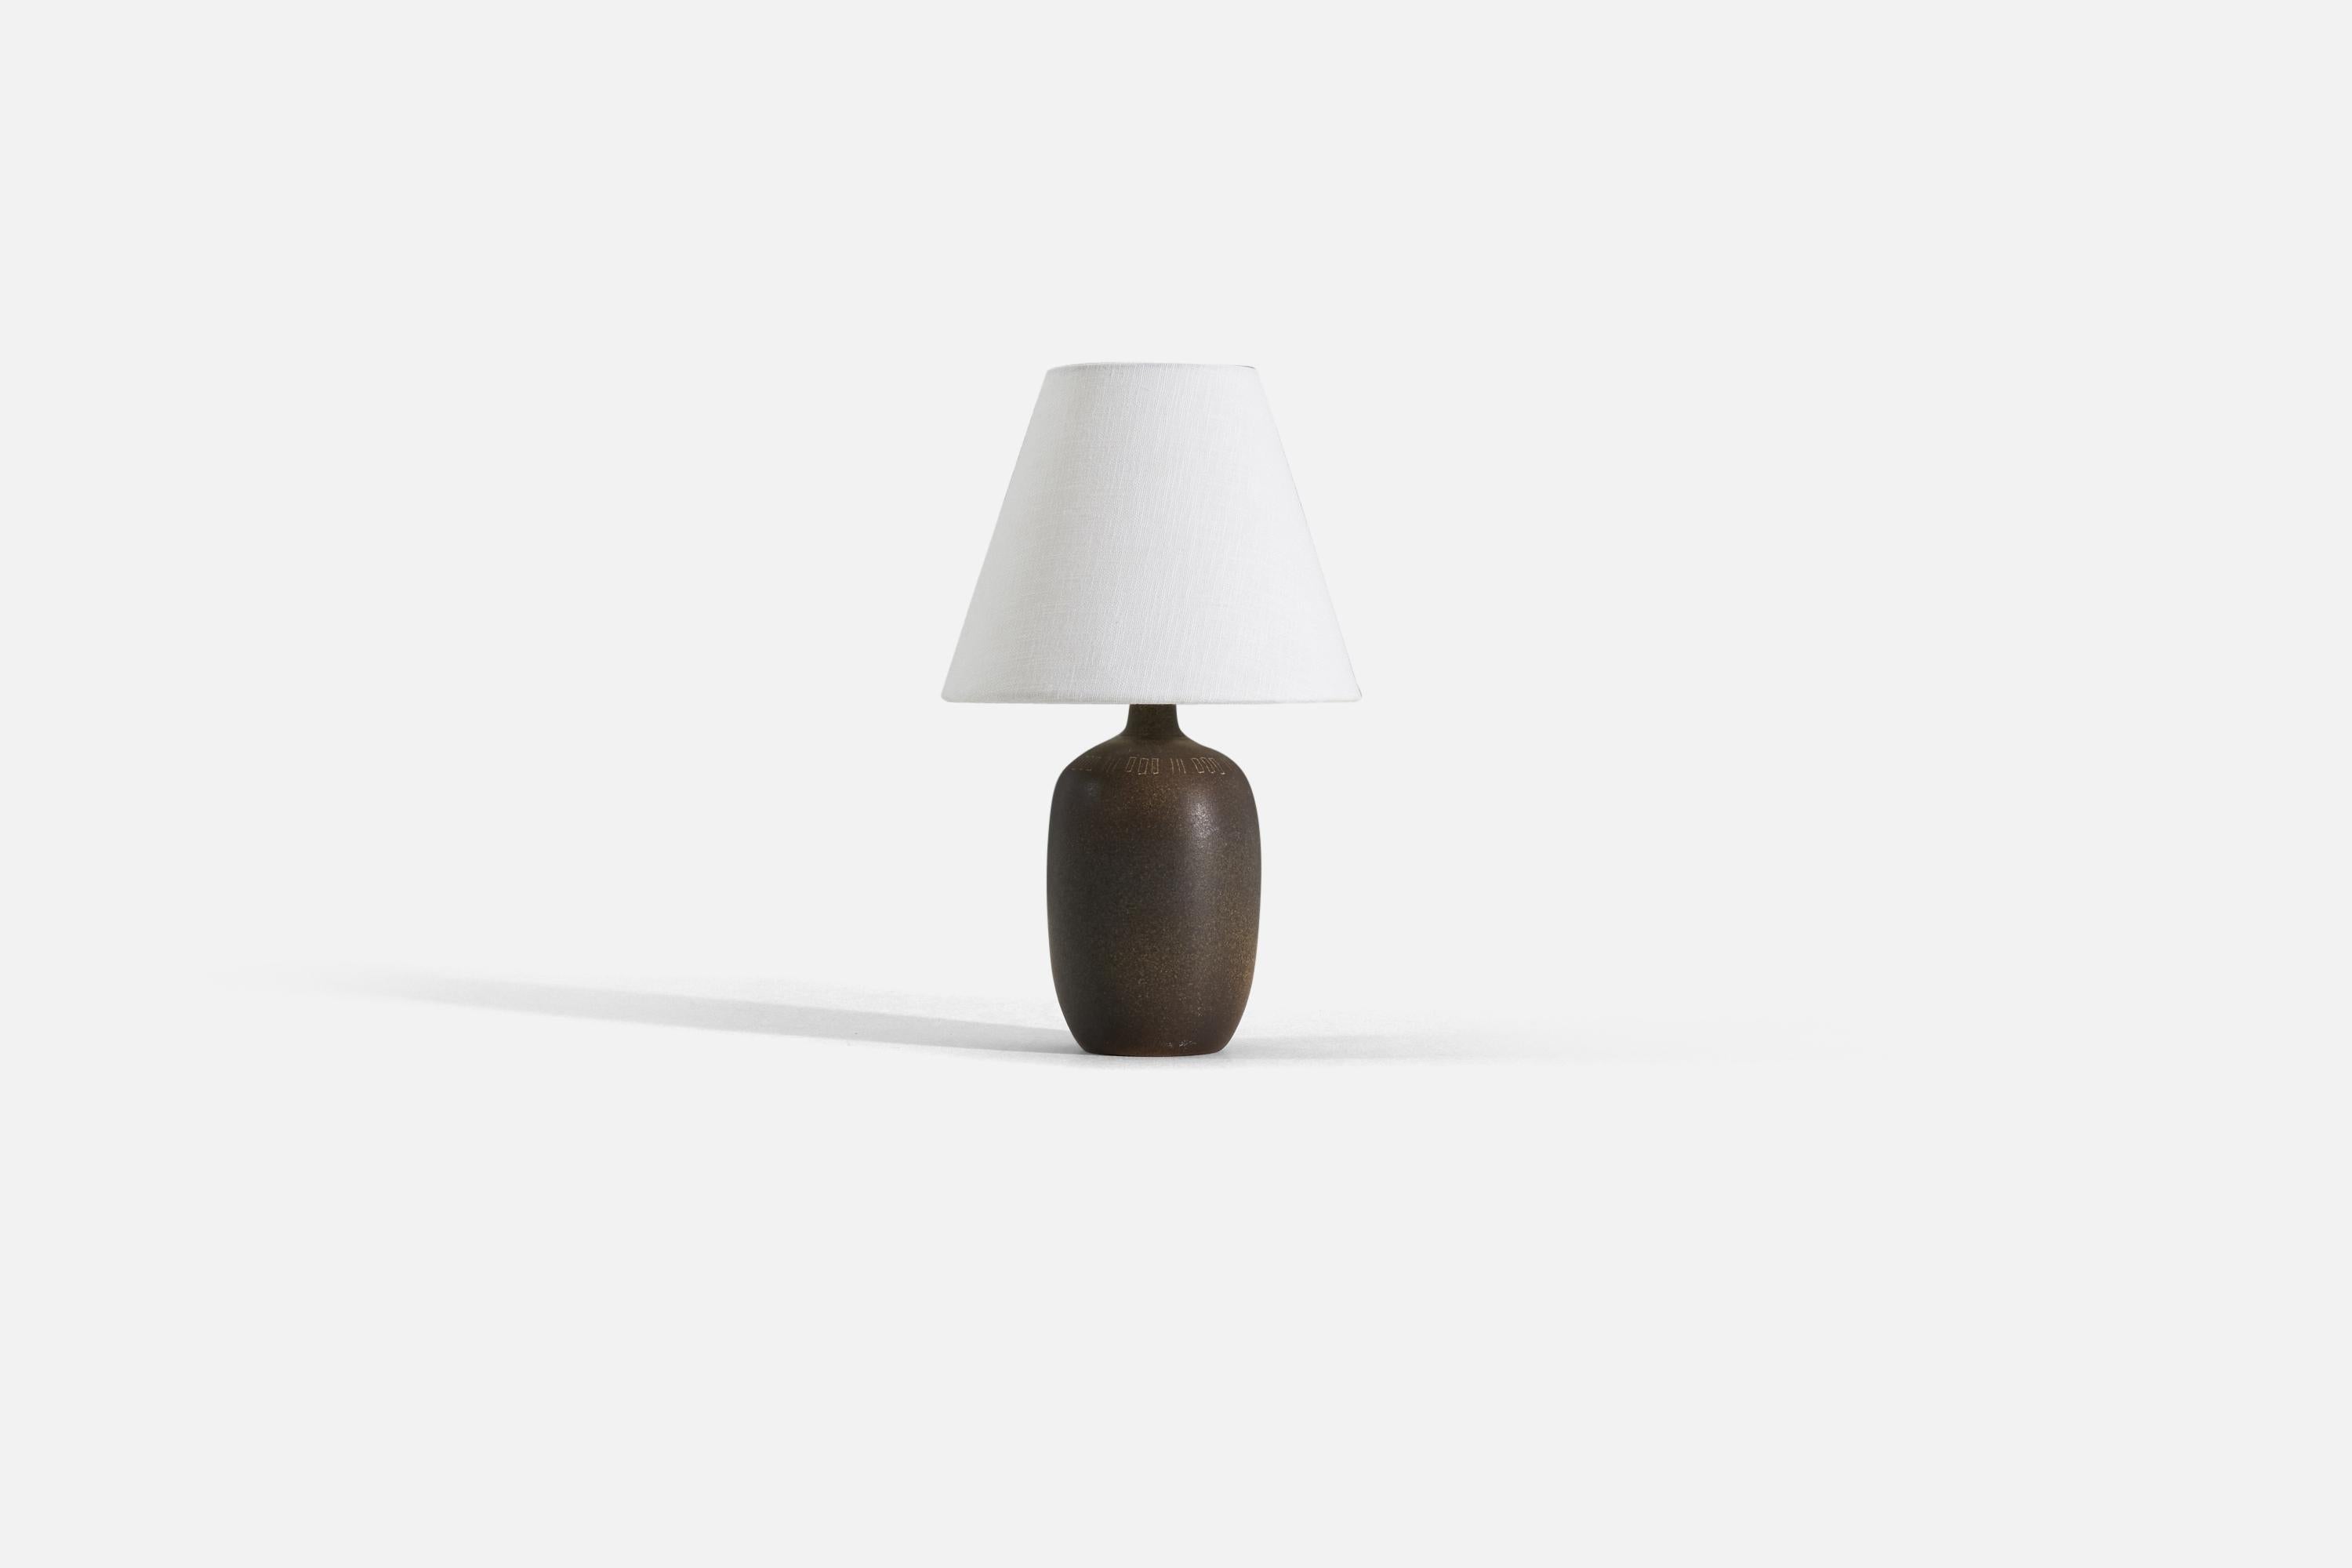 A brown-glazed and incised stoneware table lamp designed and produced by Agne Aronson, Sweden, in the 1960s.

Sold without lampshade. 

Measurements listed are of lamp.
For reference. 
Shade : 4 x 8 x 6.75
Lamp with shade : 13 x 8 x 8.